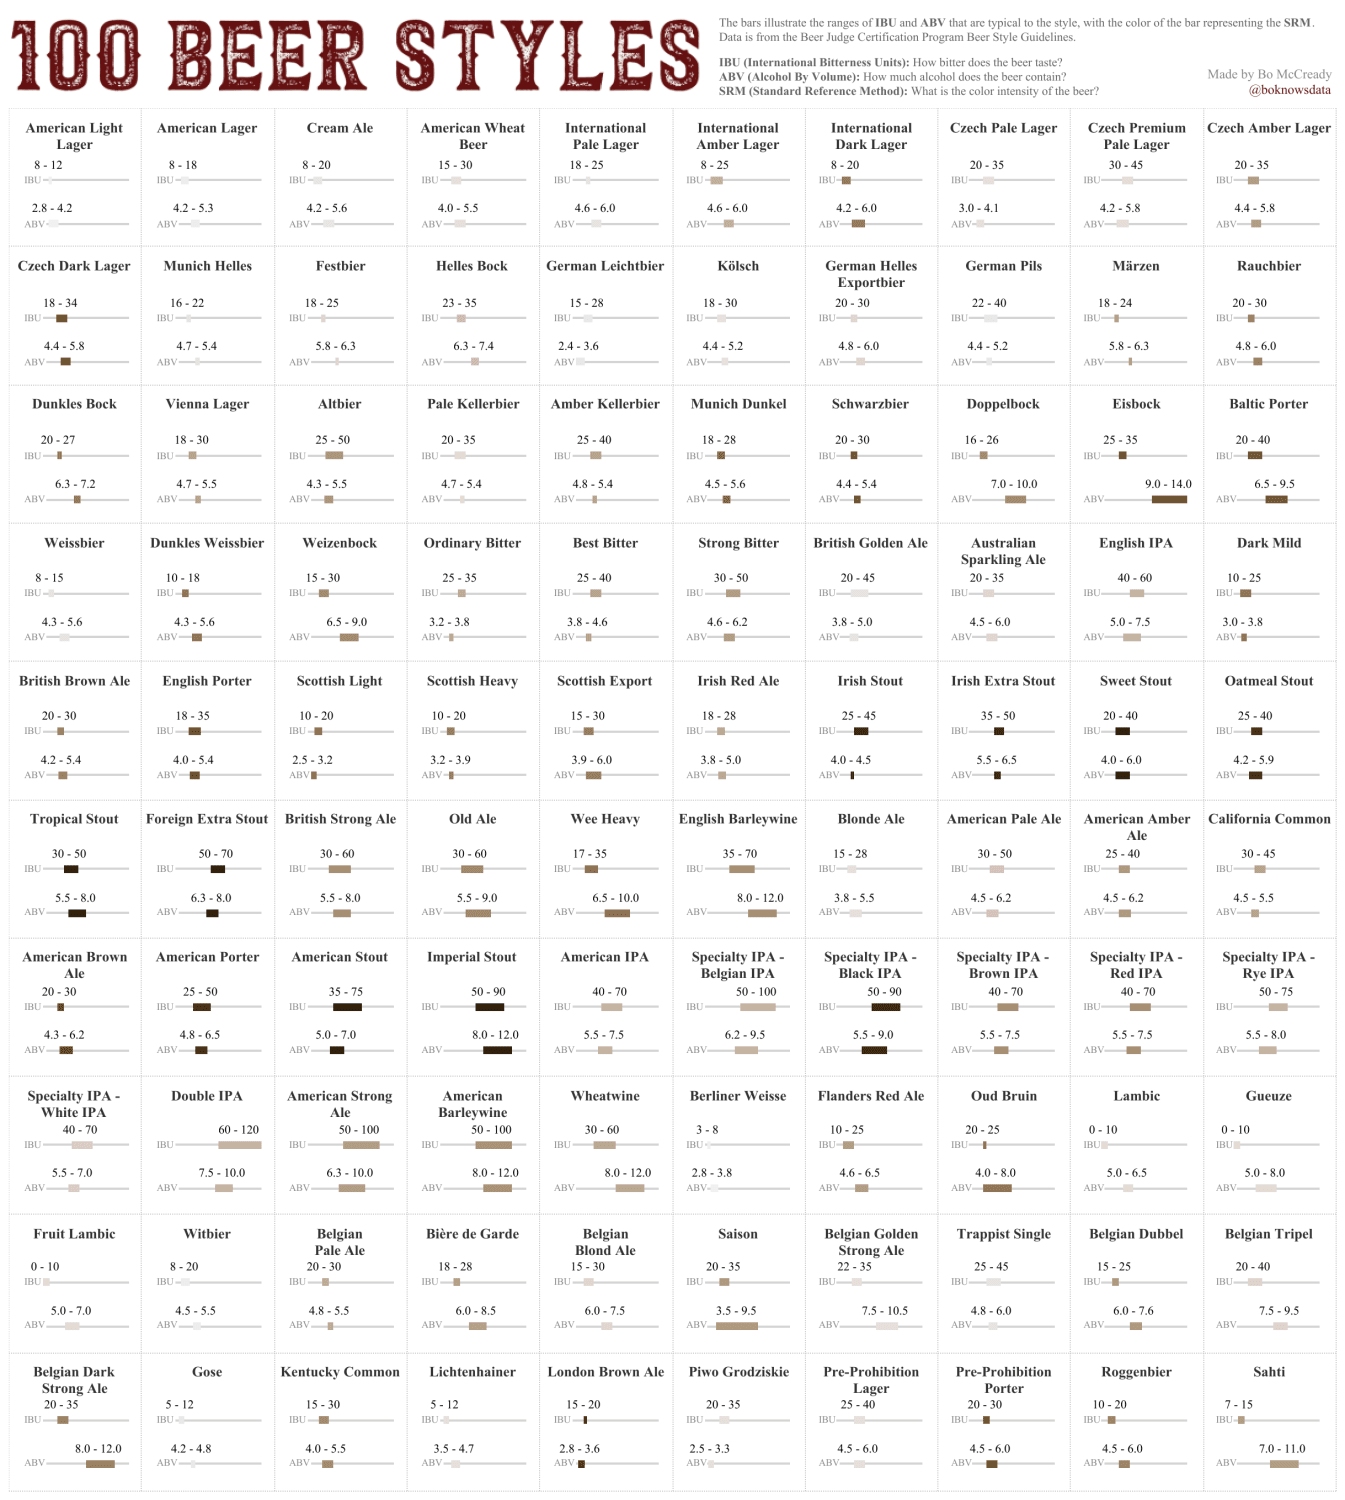 100 Beer Styles: Bitterness, Alcohol, and Color